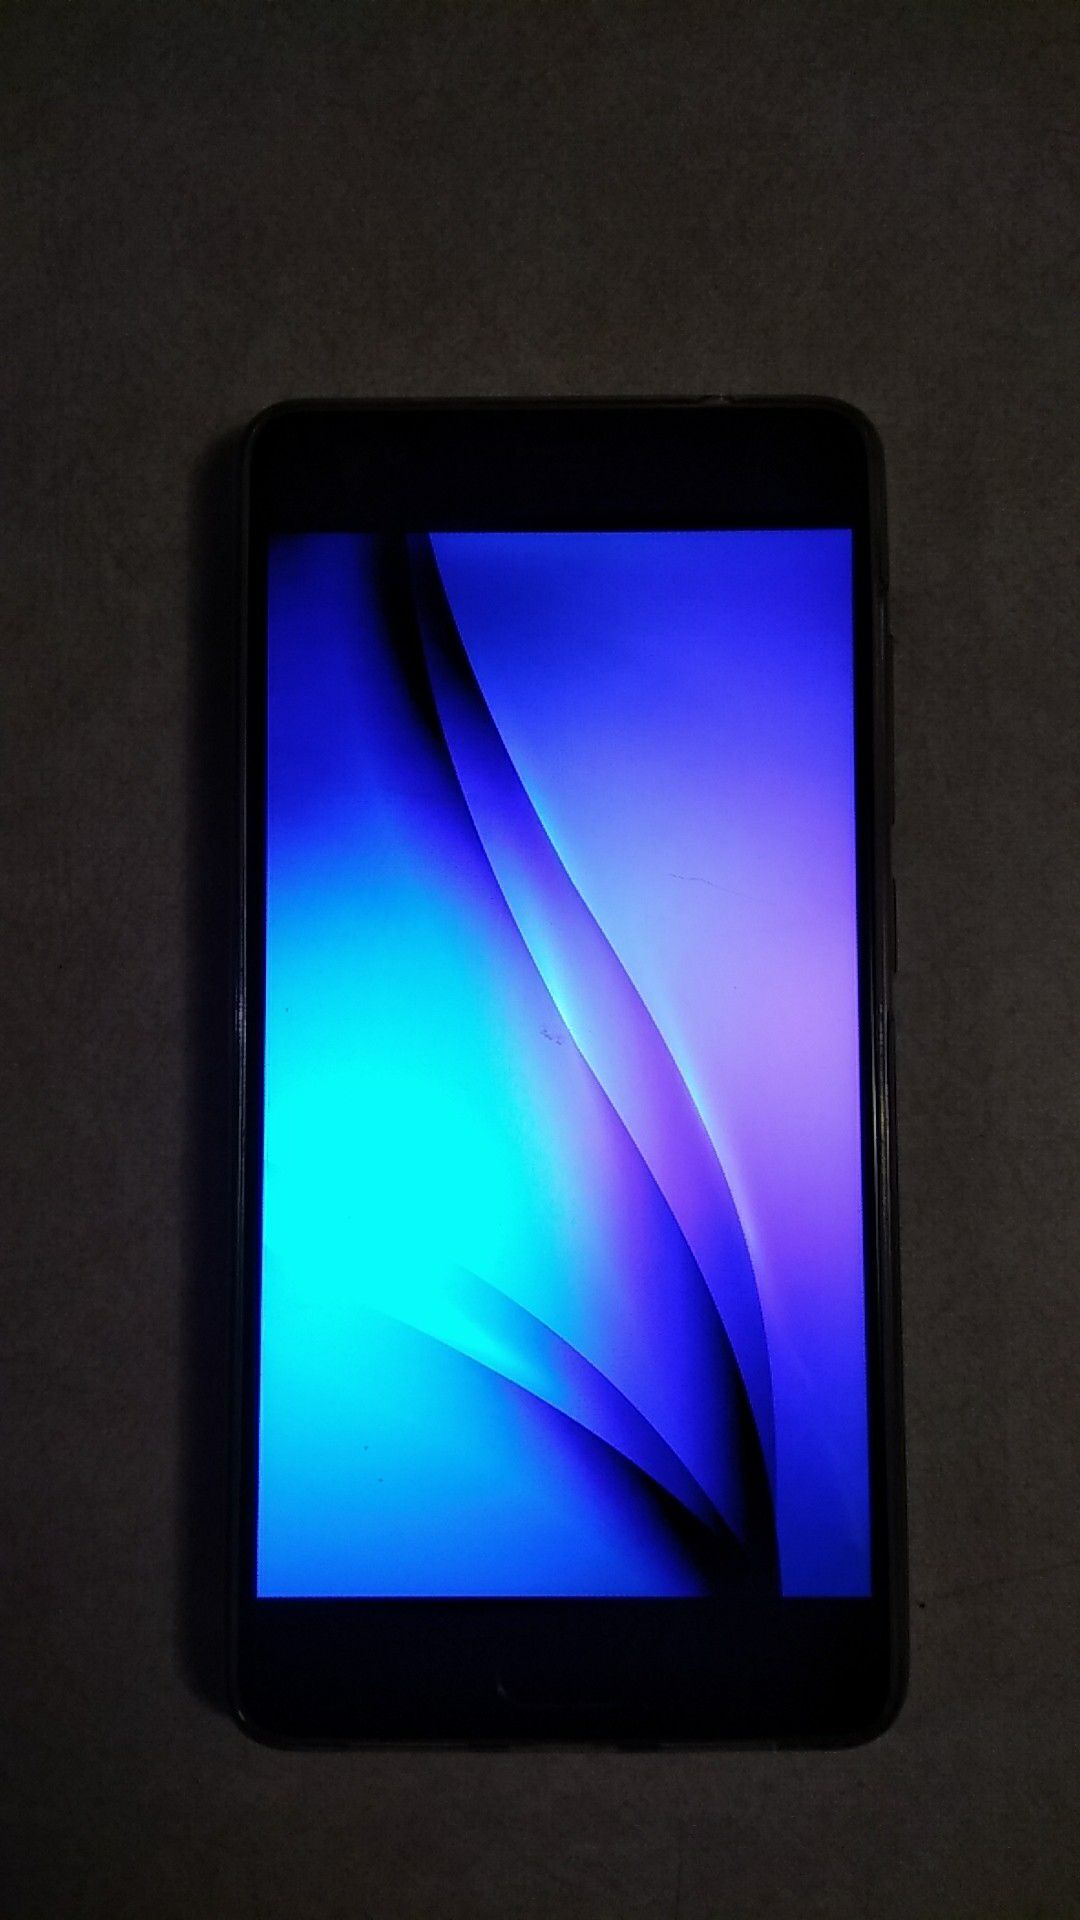 Blu life one x3 Android smartphone